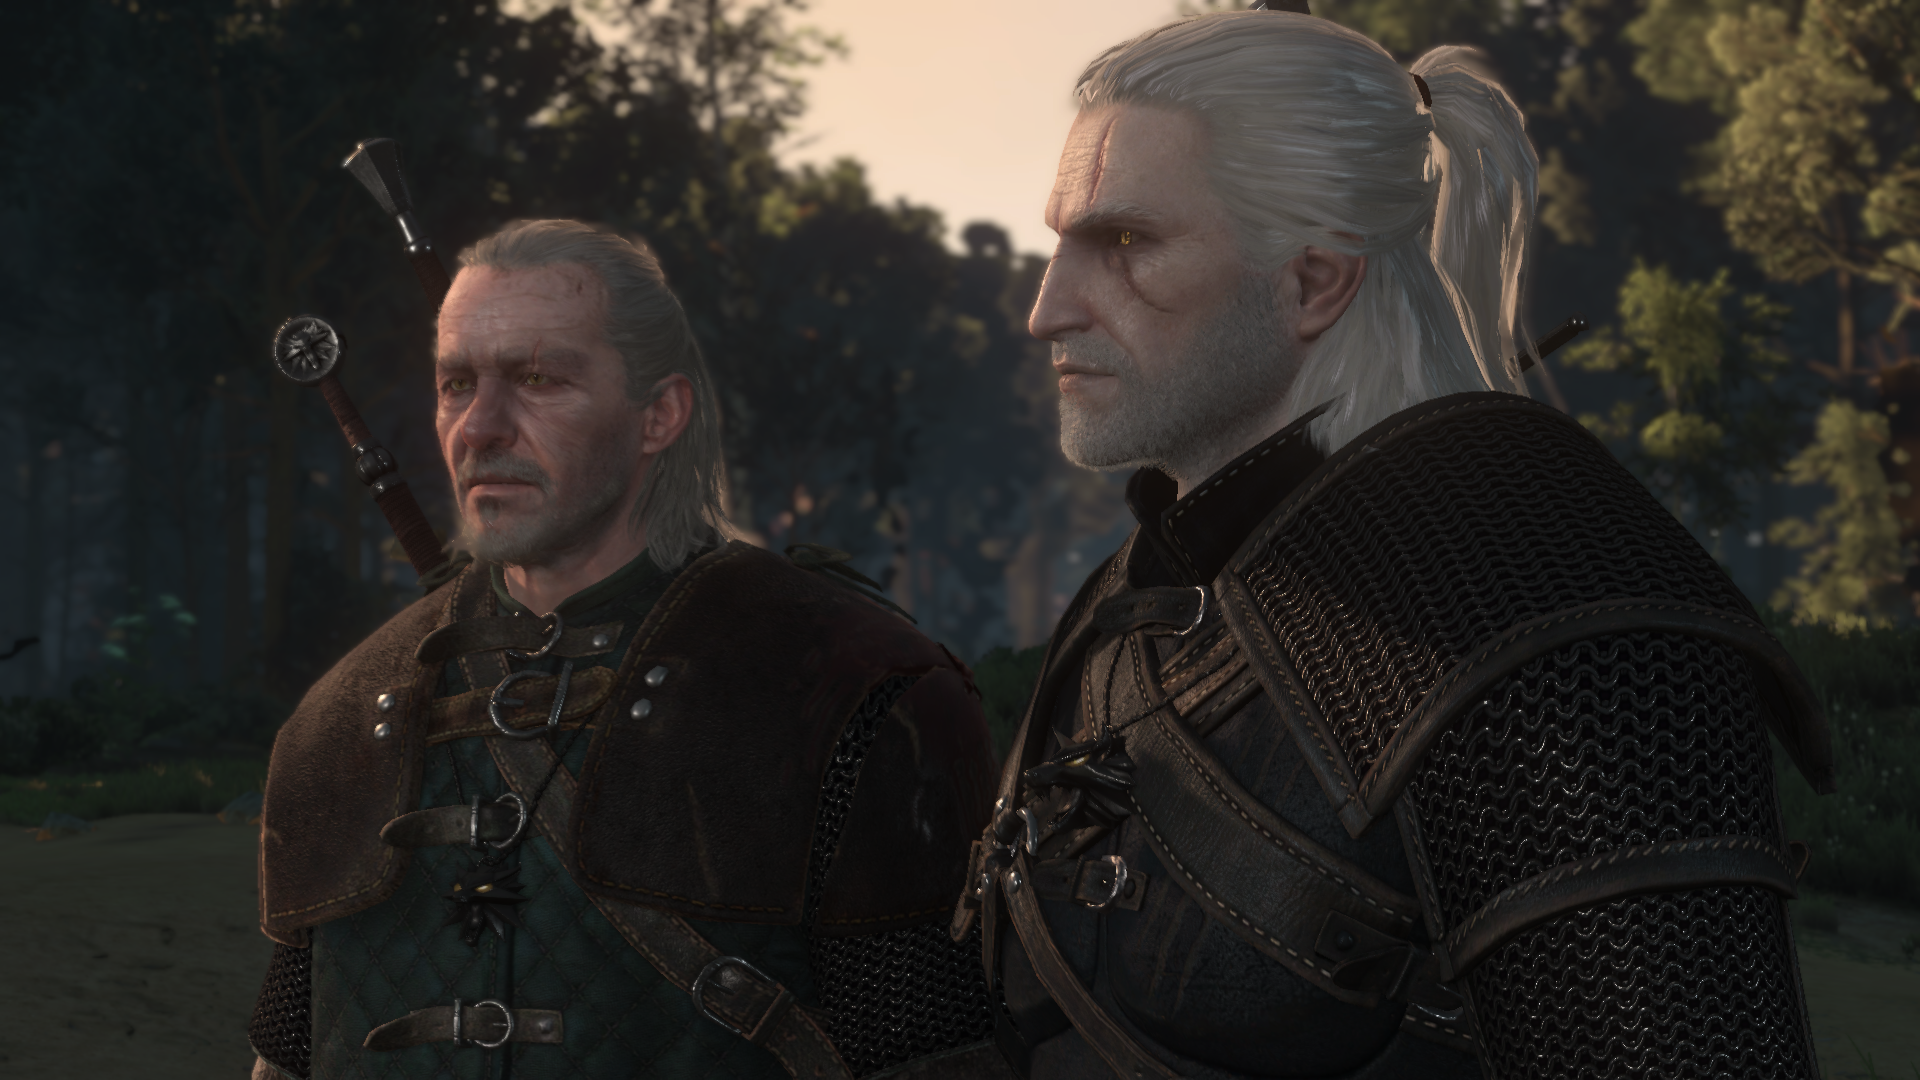 Vesemir and Geralt at The Witcher 3 Nexus and community